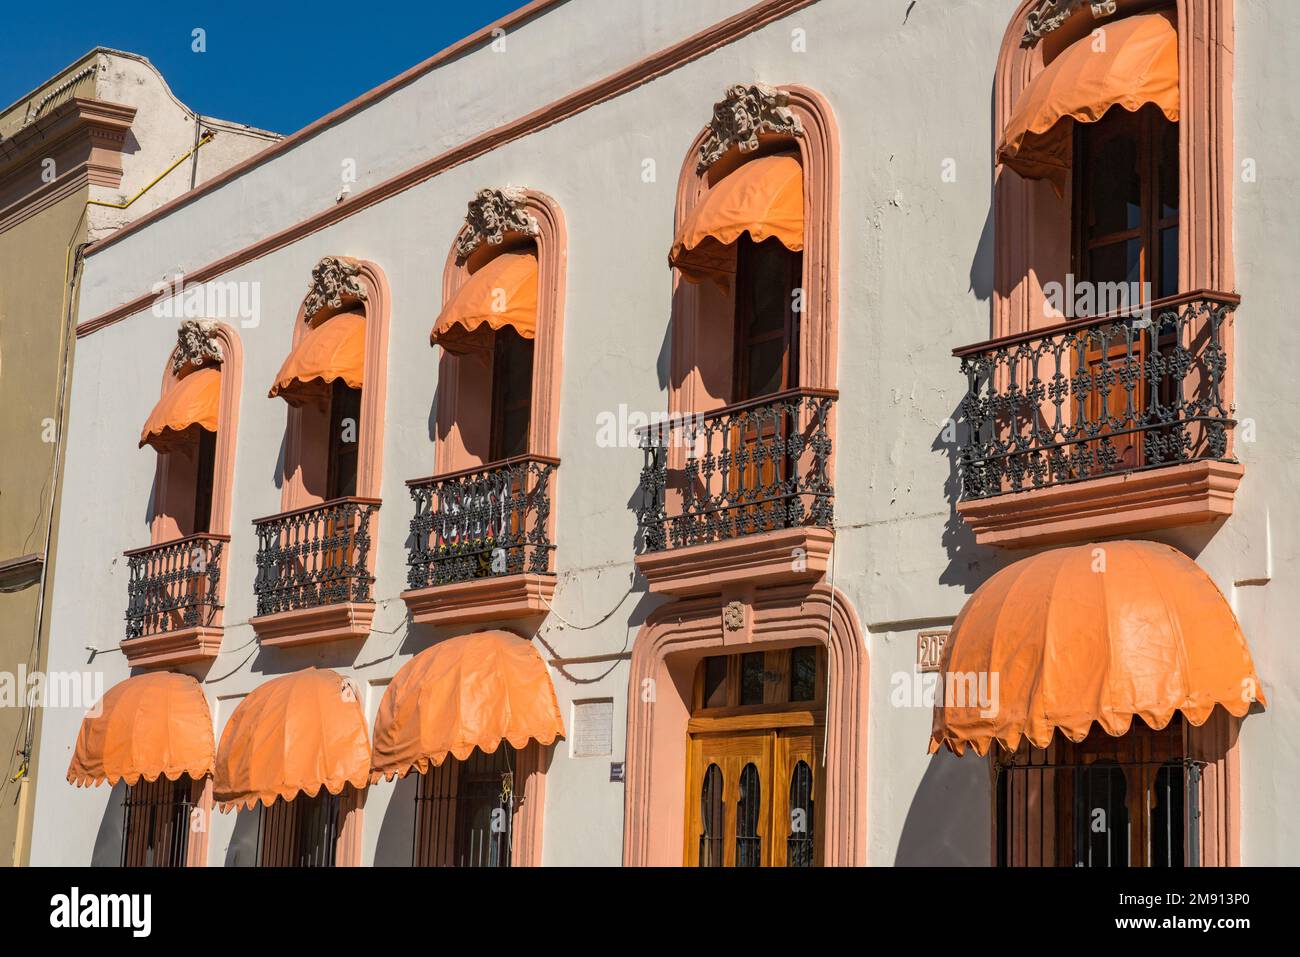 Colorful awnings on an historical building from the Spanish colonial era in the historic center of Oaxaca, Mexico.  UNESCO World Heritage Site of the Stock Photo